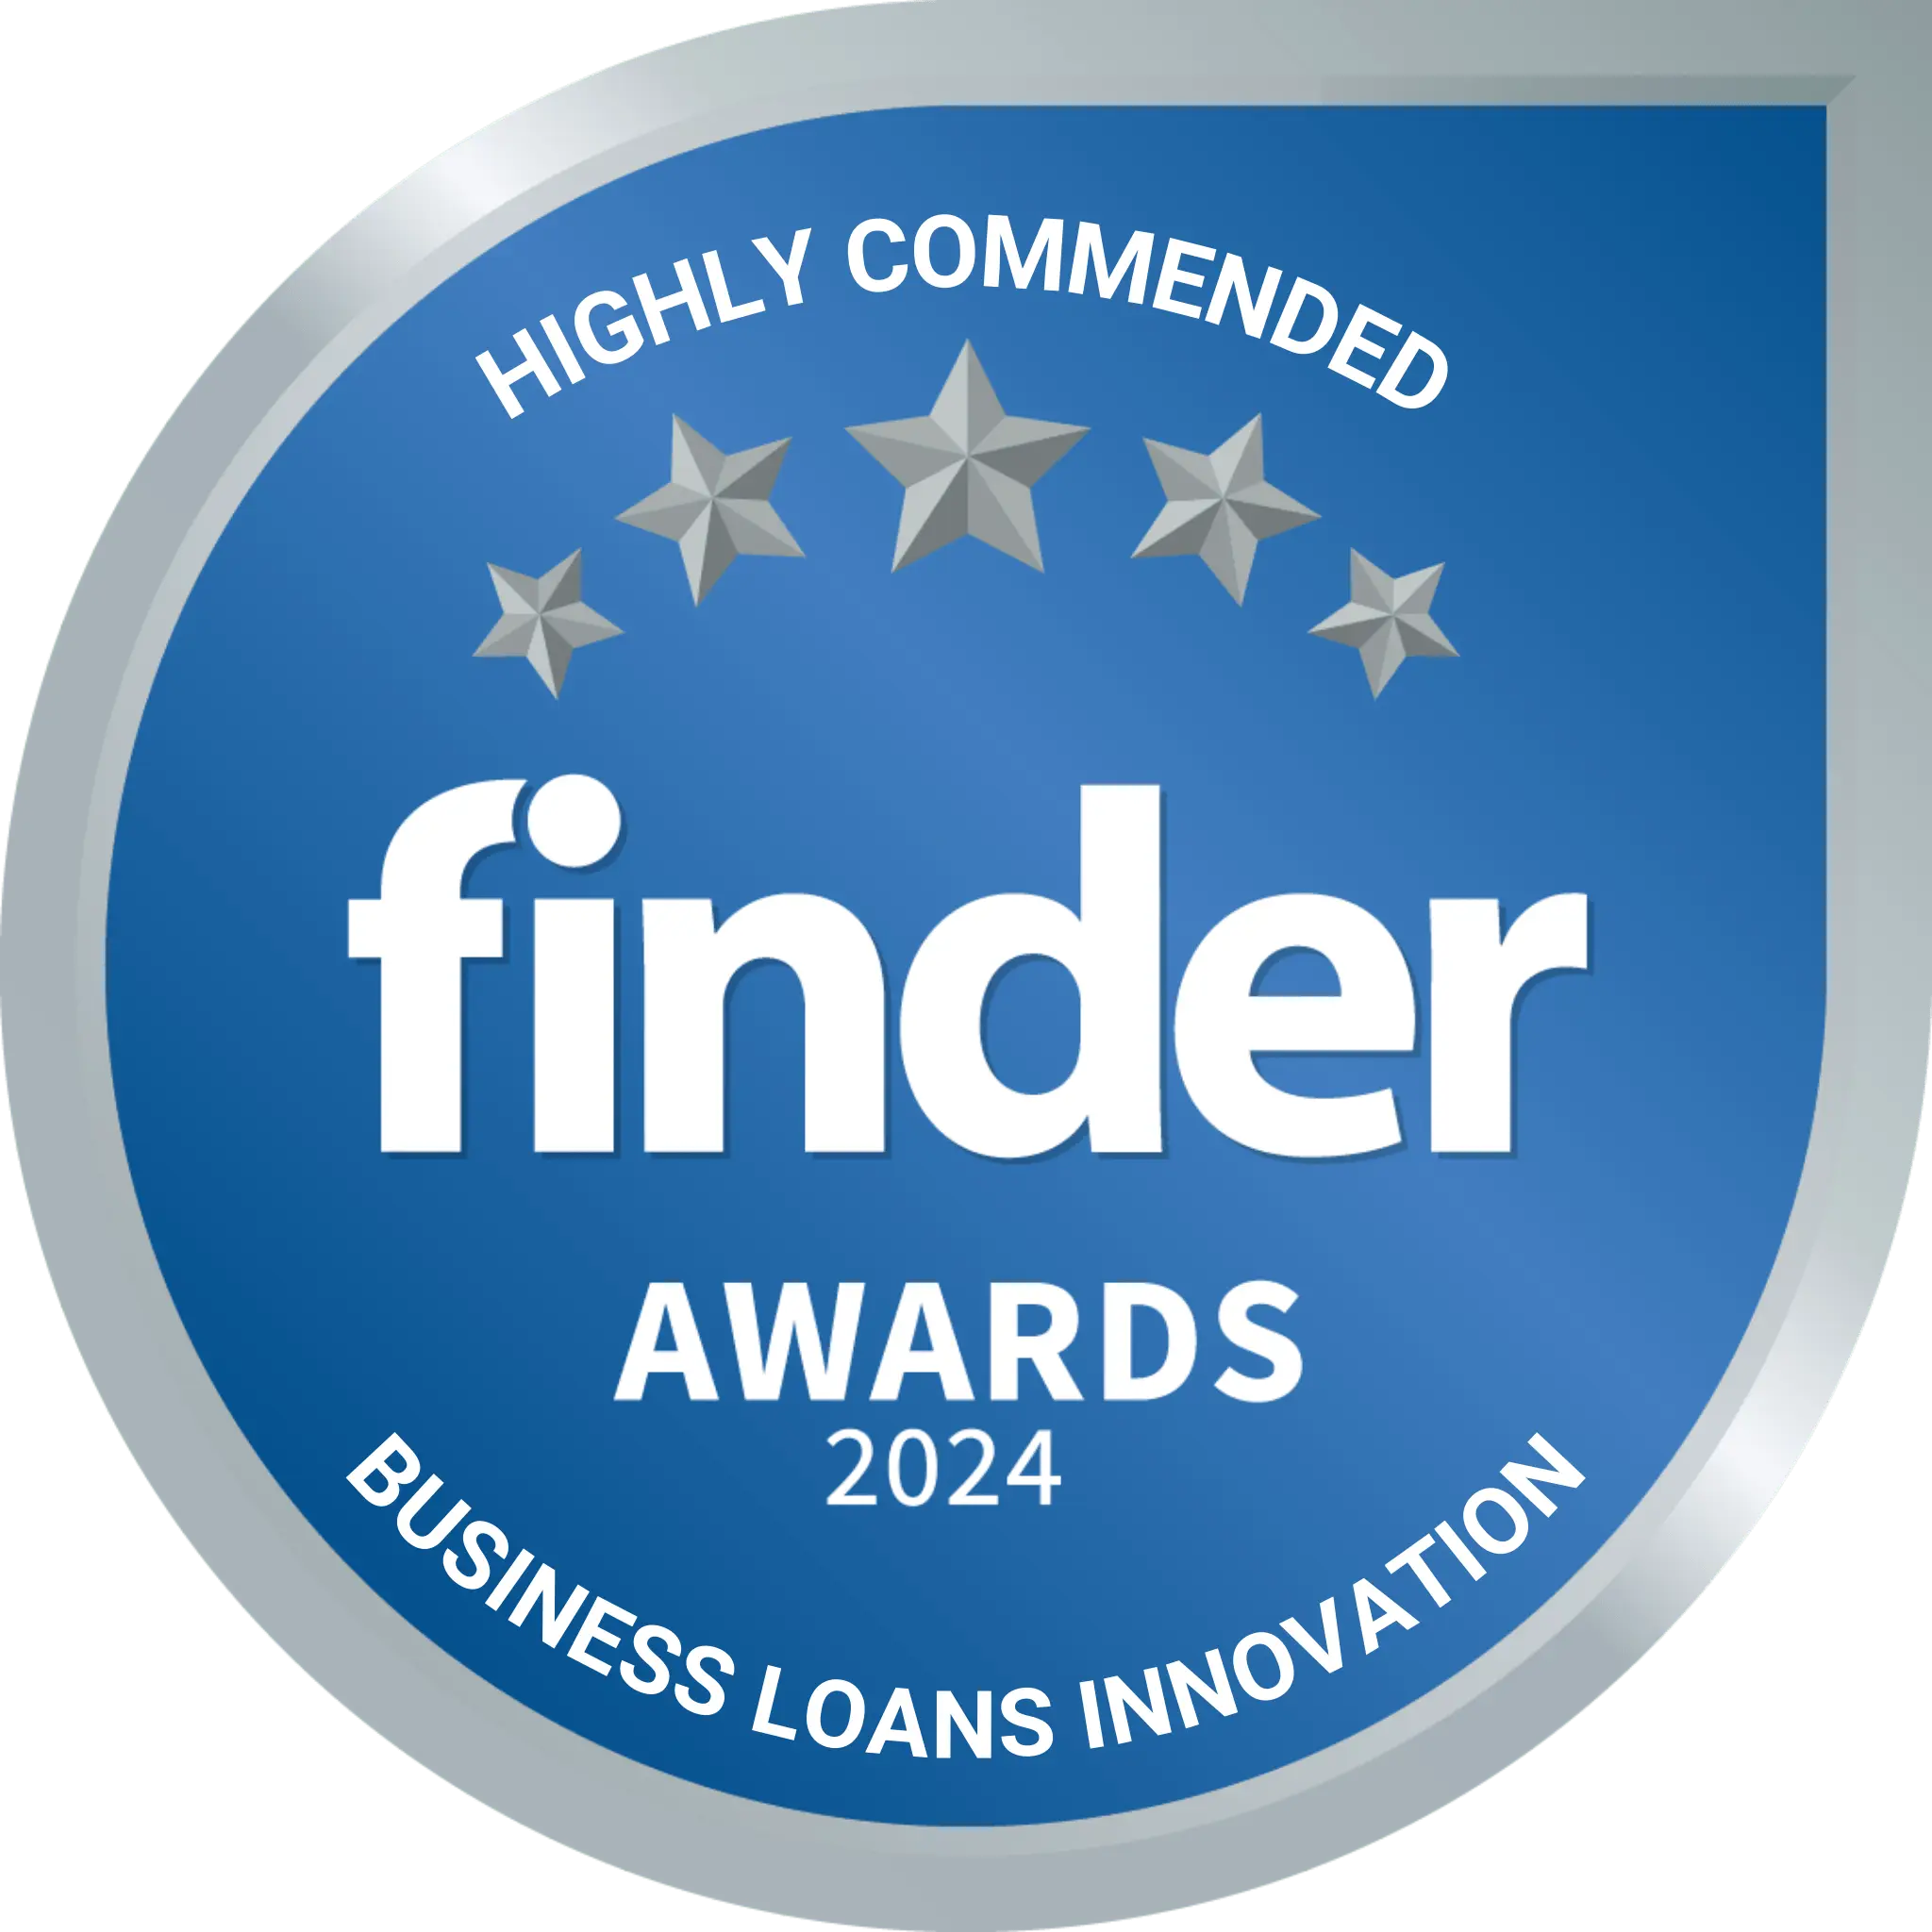 Highly Commended Business Loans Innovation